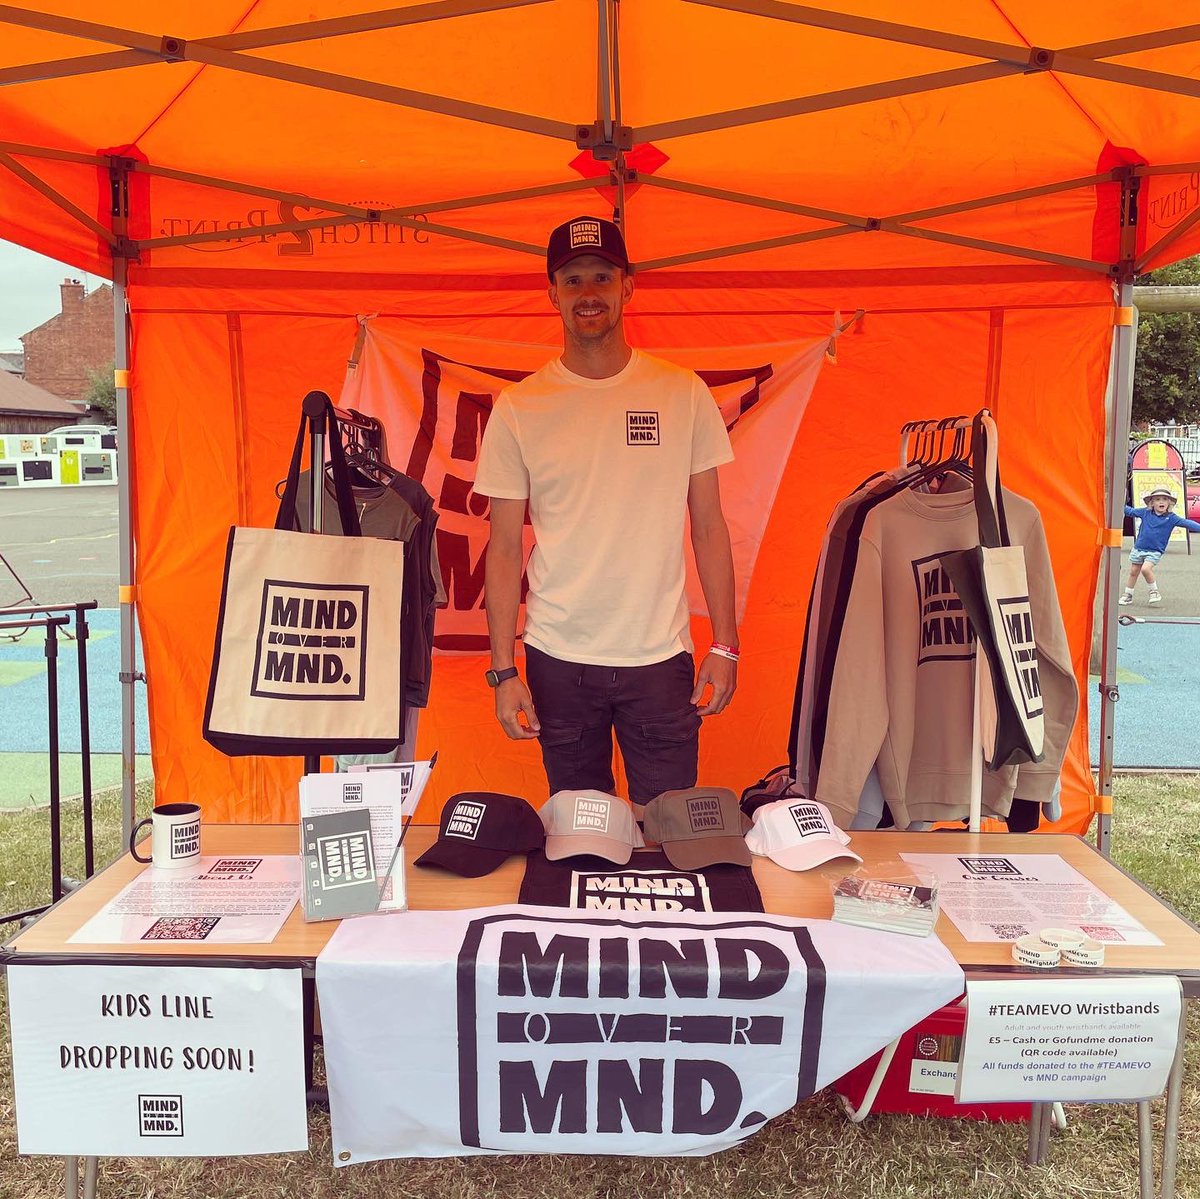 We will be ‘pitching up’ at St James Park with our pop-up stall tomorrow (Sunday 2nd July) for the fantastic Party at the Park event 🔴⚪️ in aid of @TeamEvo_MND campaign Our aim is to raise awareness of the disease and what you can do to help us in #TheFightAgainstMND